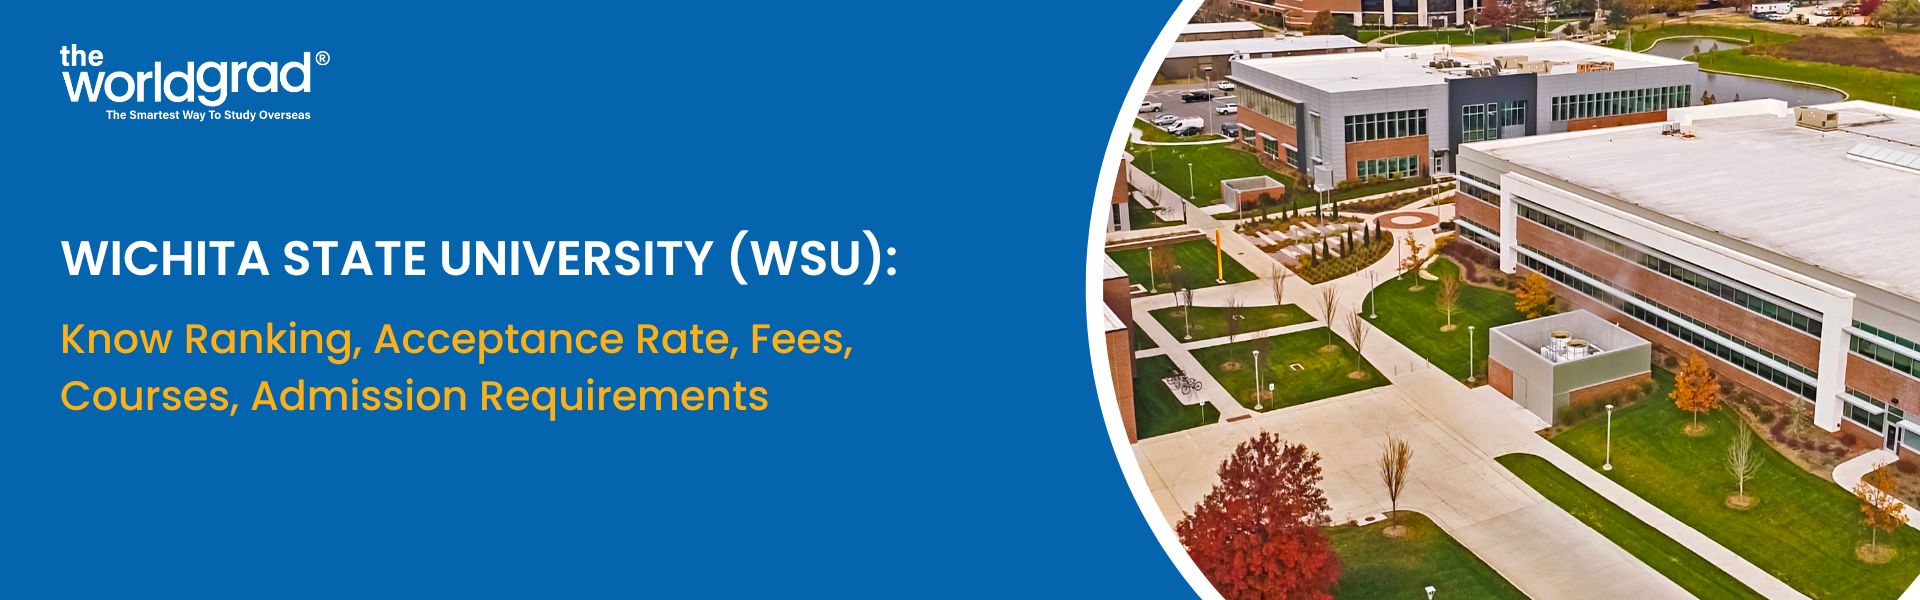 Wichita State University (WSU): Know Ranking, Acceptance Rate, Fees, Courses, Admission Requirements